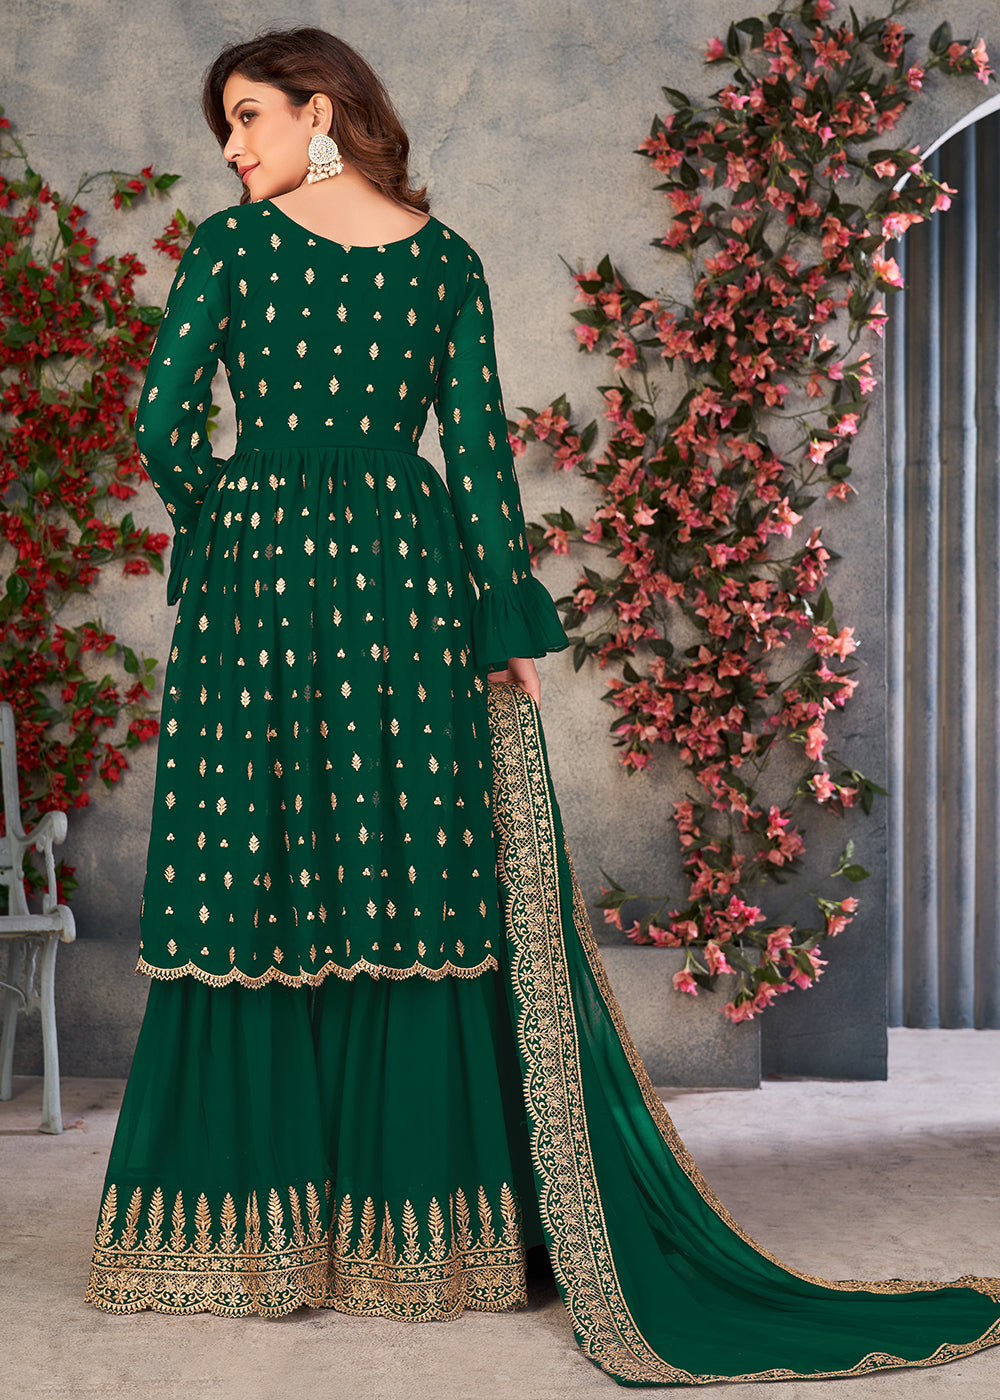 Shop Now Winsome Green Georgette Sangeet Wear Sharara Suit Online at Empress Clothing in USA, UK, Canada, Germany & Worldwide.